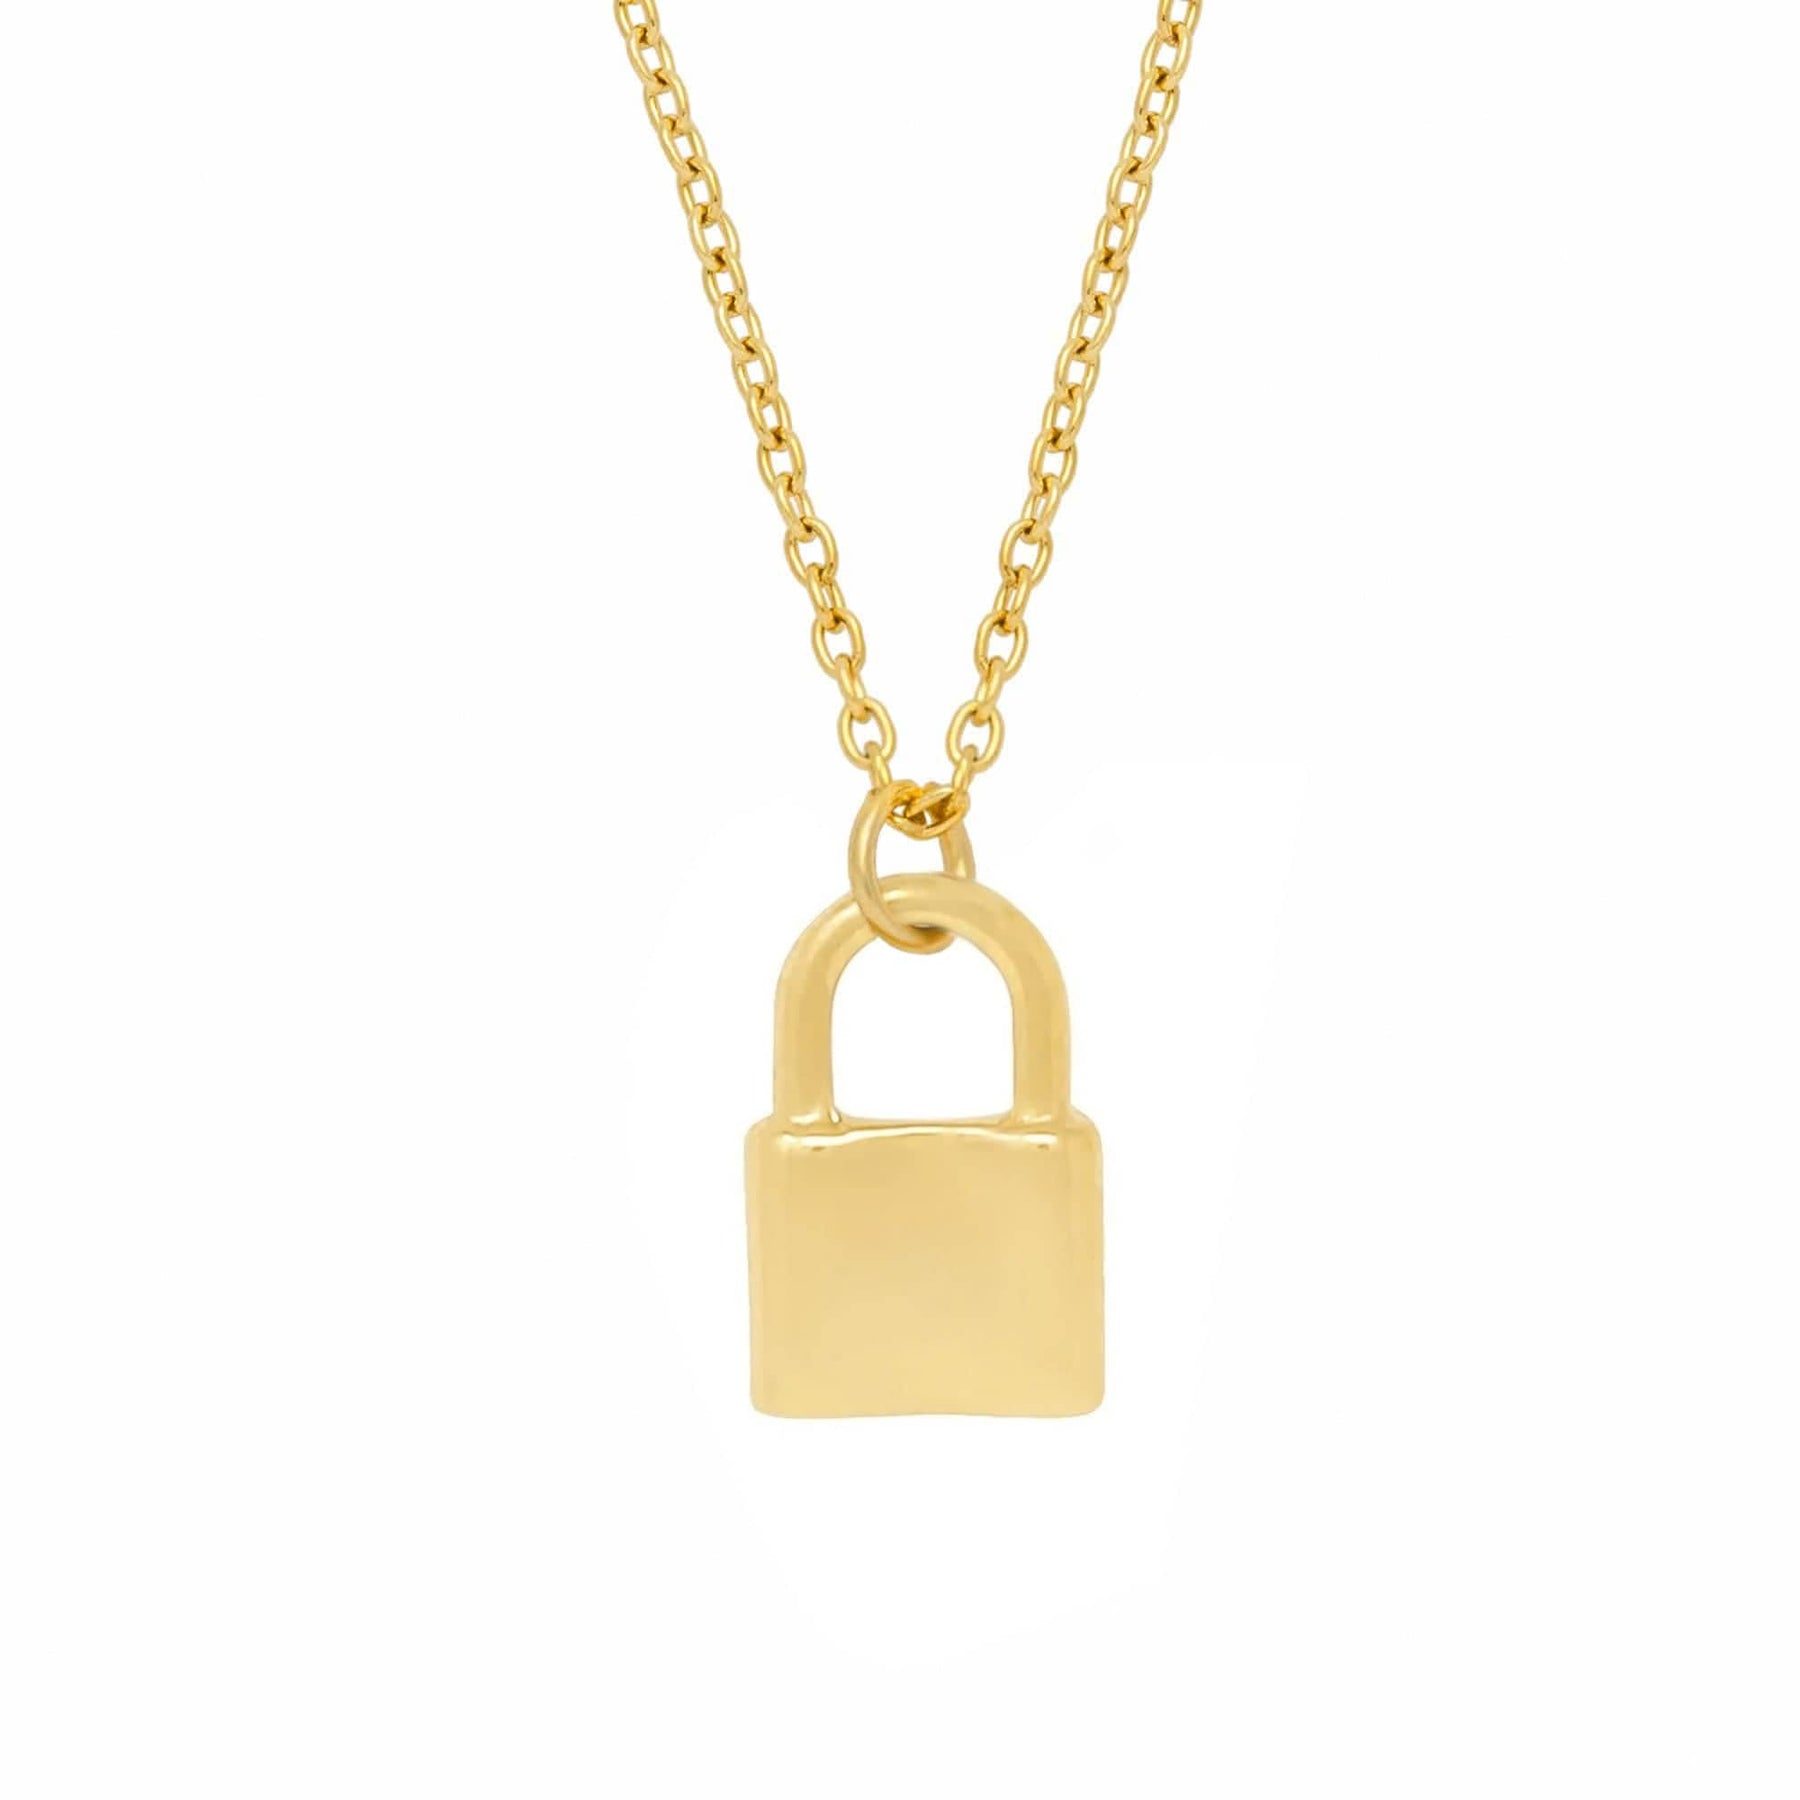 BohoMoon Stainless Steel Padlock Necklace Gold